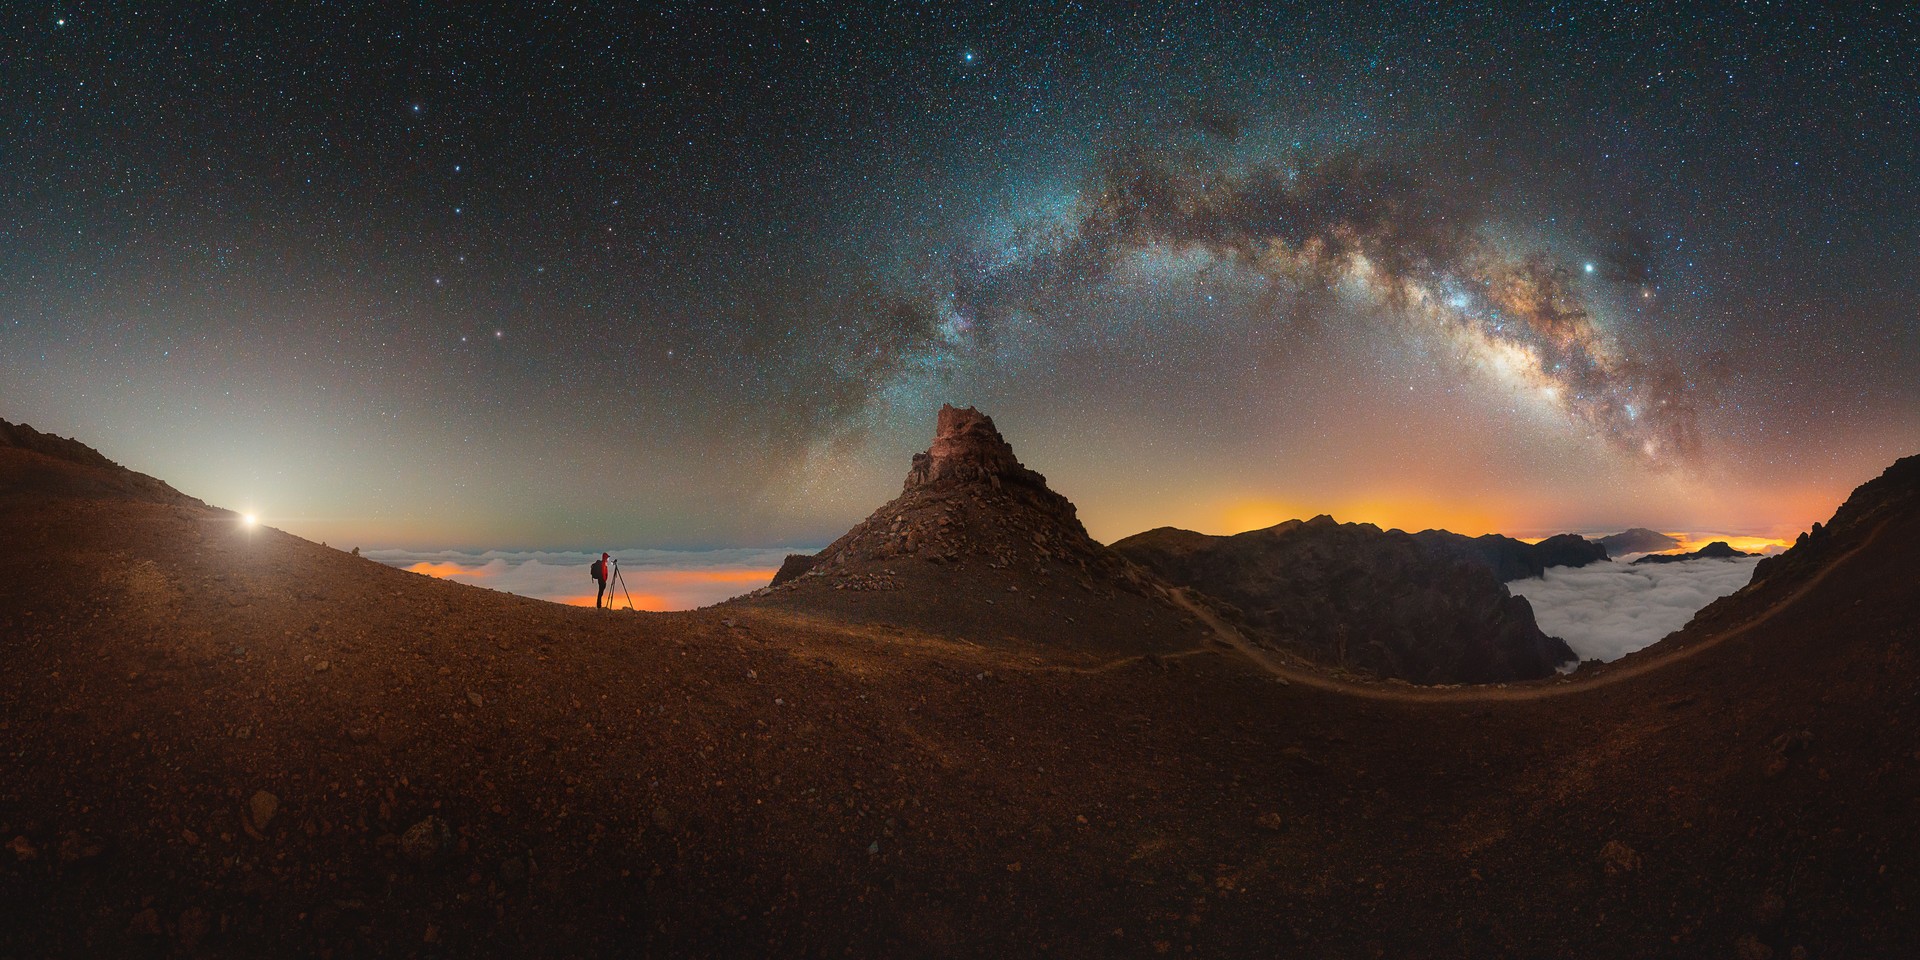 Milky Way arch over mountain